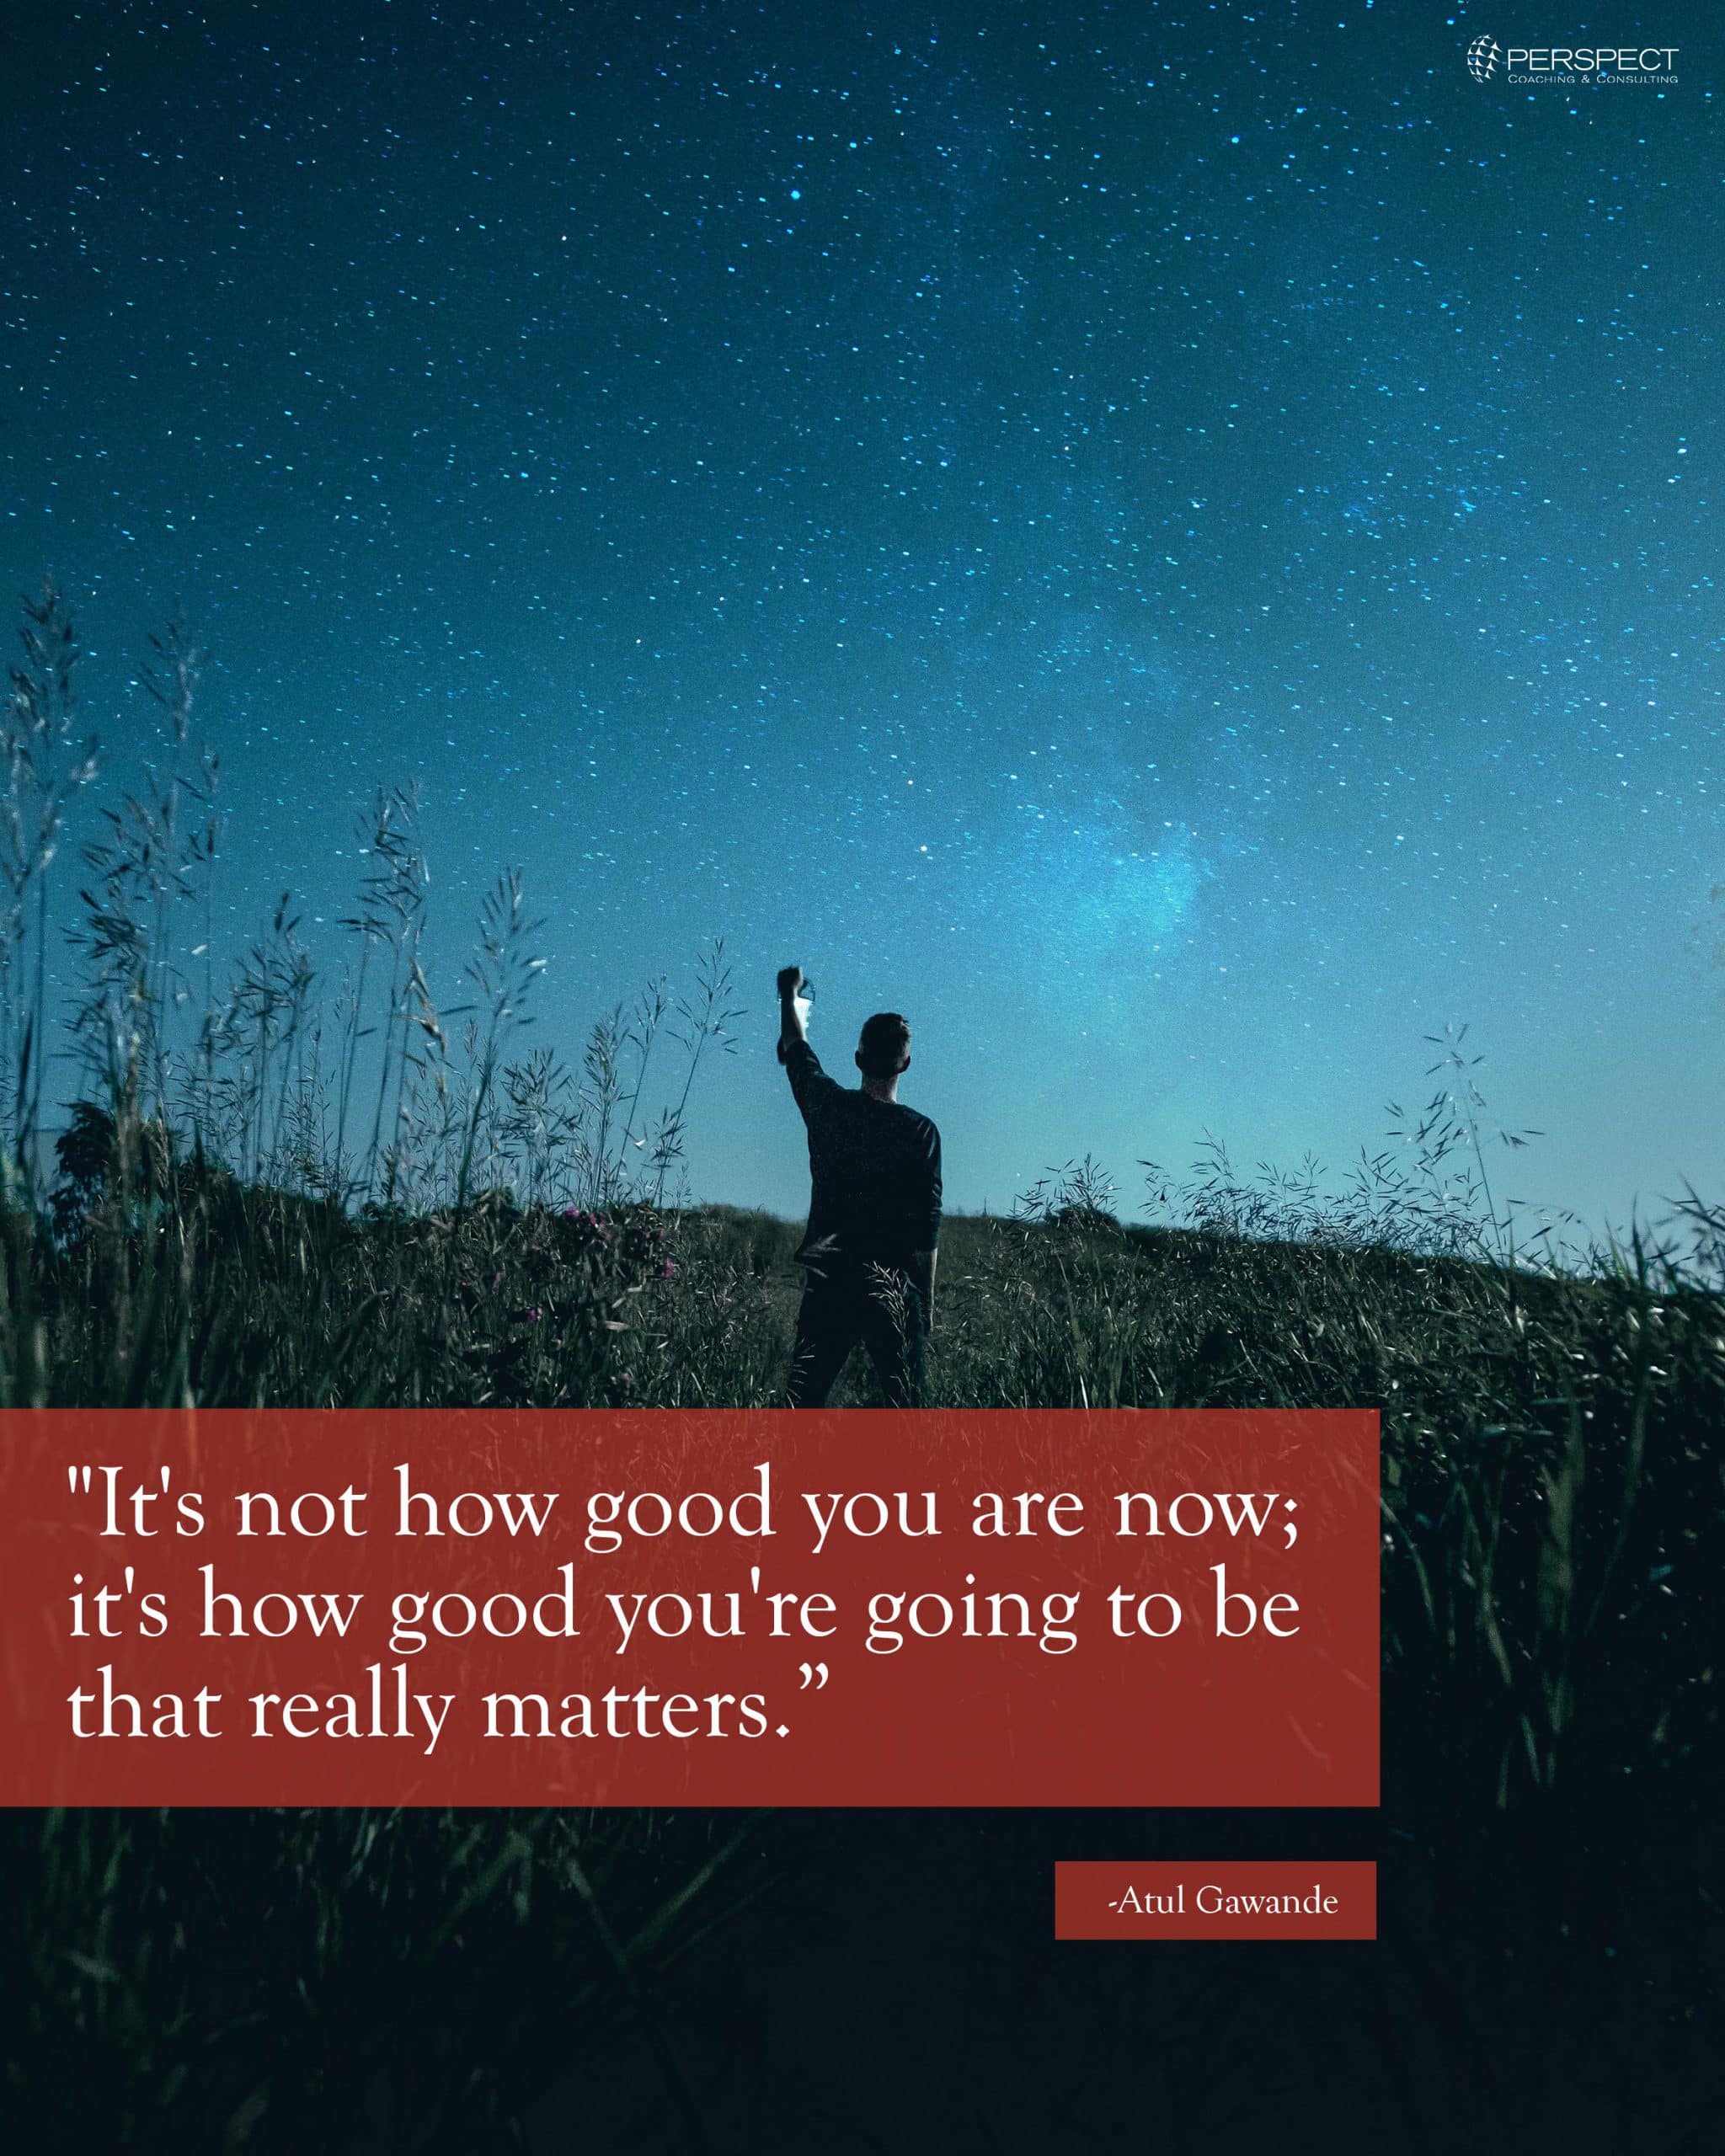 It's not how good you are now; it's how good you're going to be that really matters